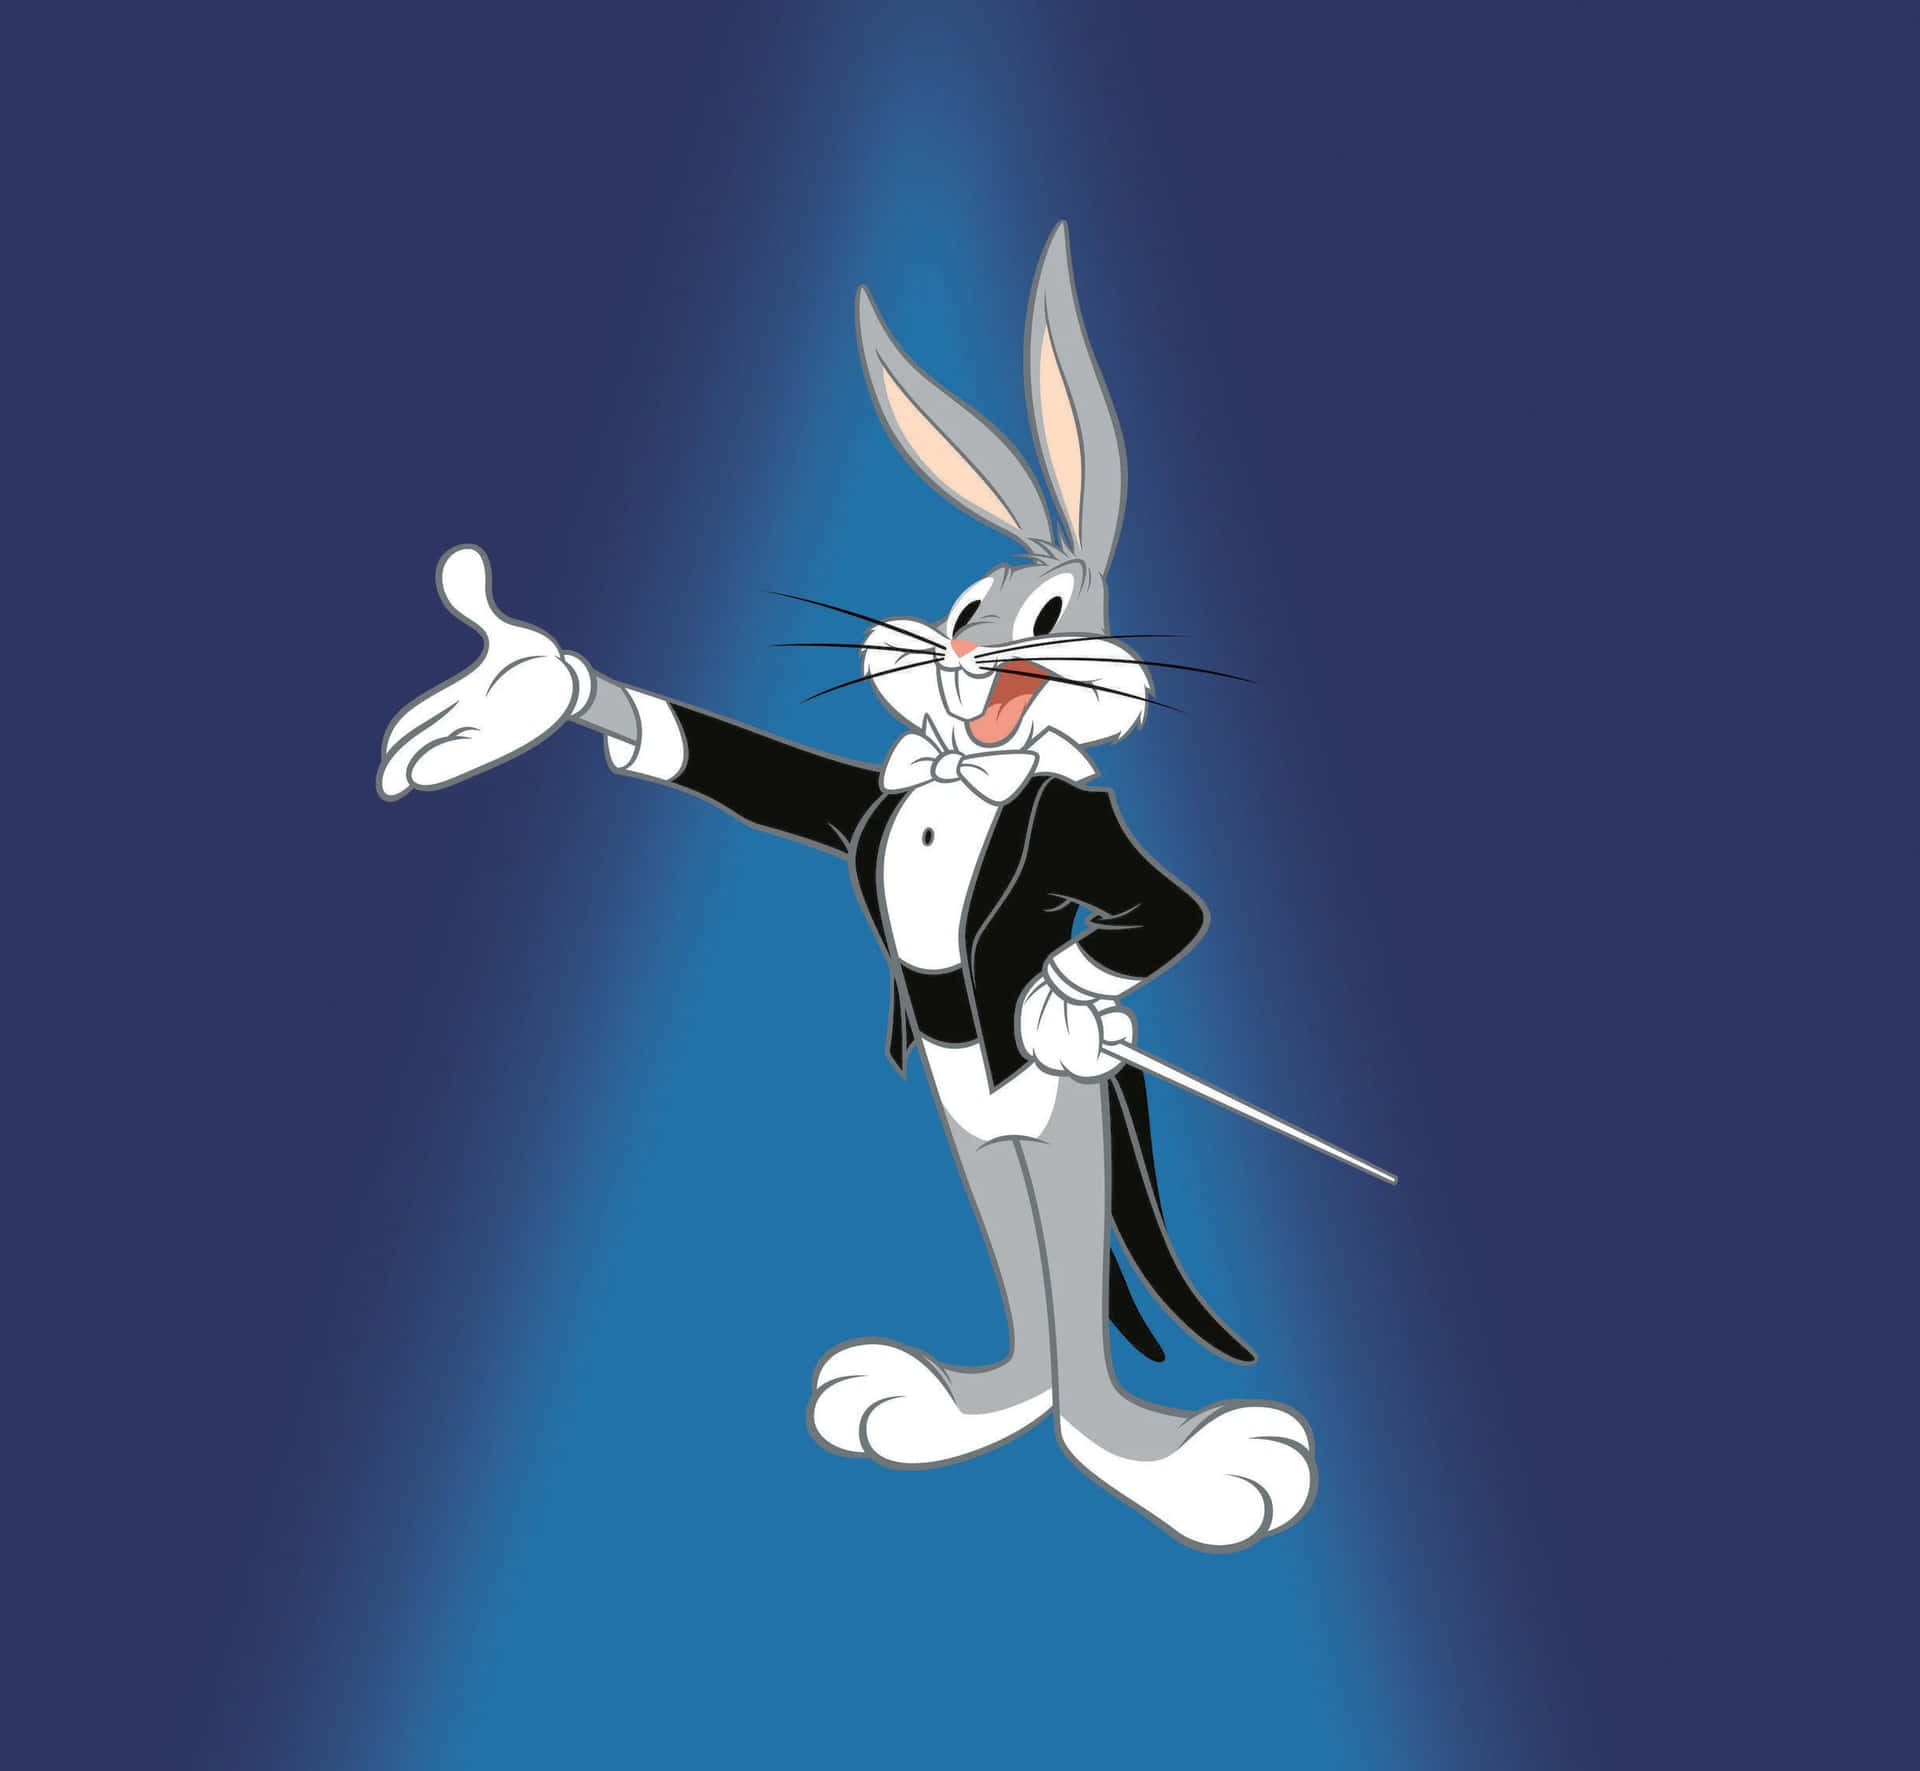 Download Iconic Cartoon Character Buggs Bunny In Natural Environment ...